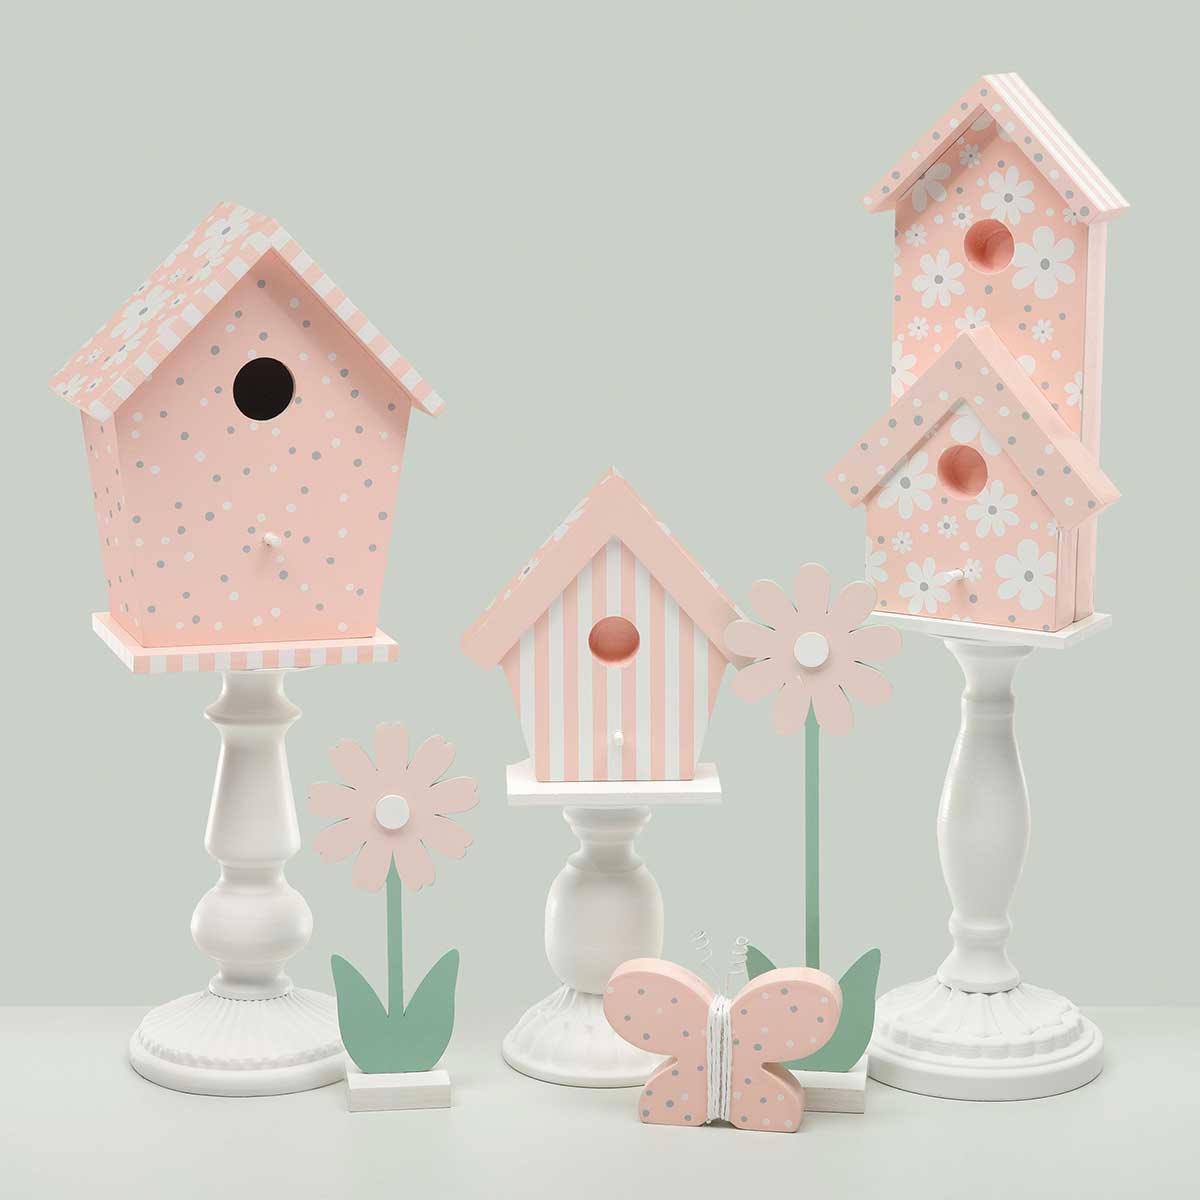 b50 BIRDHOUSE WHOOPSIE PINDOT 6.5IN X 4IN X 8IN WOOD - Click Image to Close